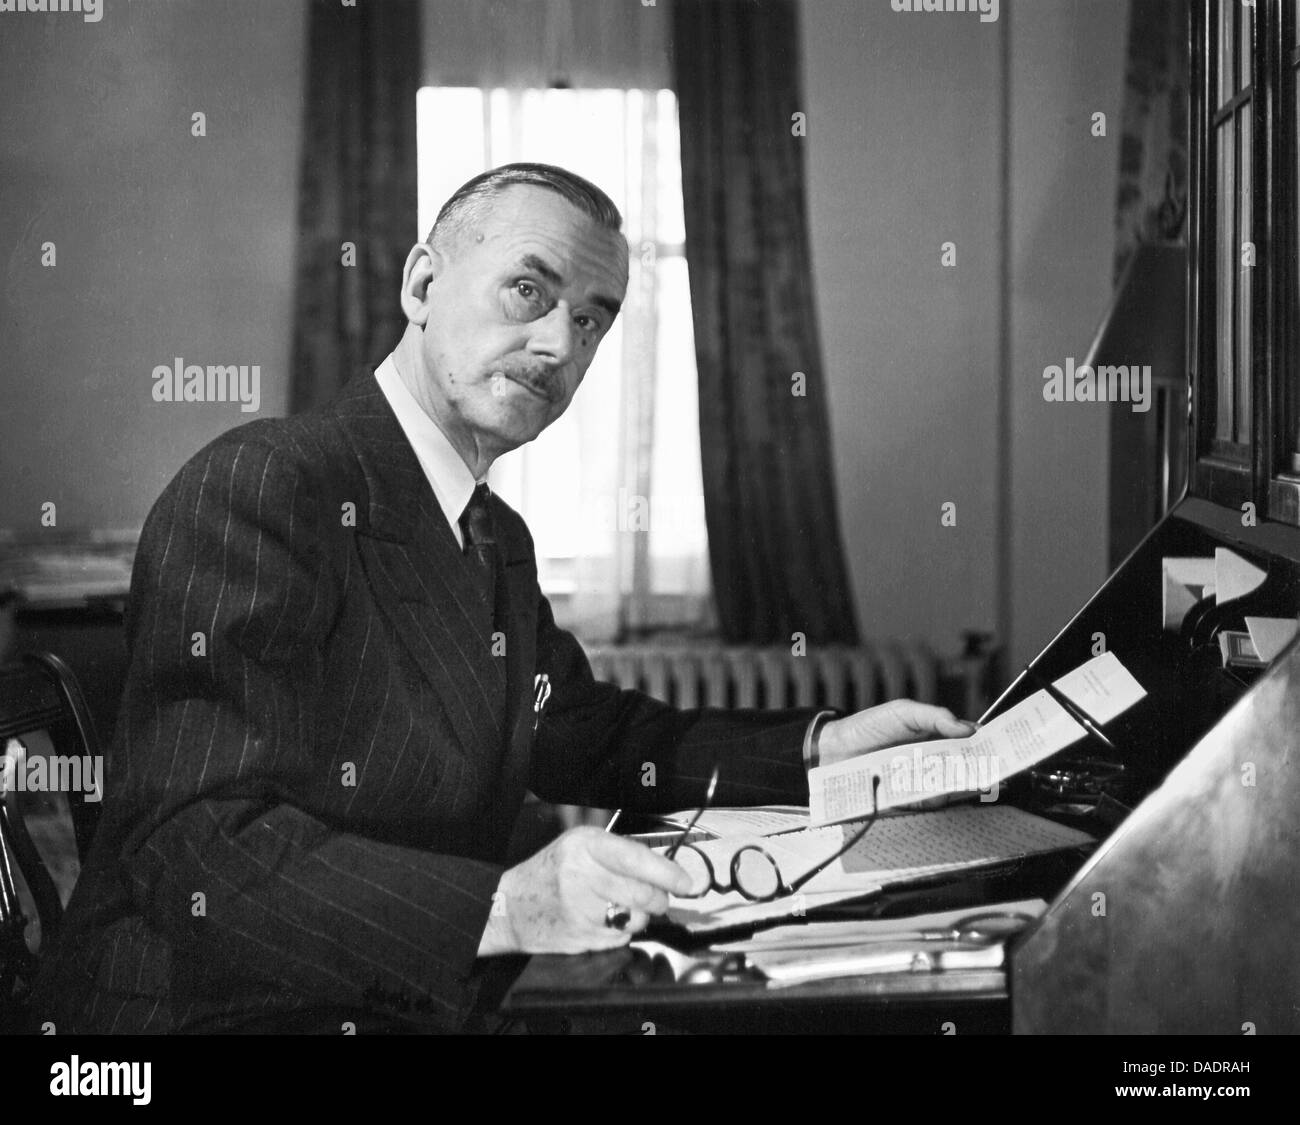 German author Thomas Mann during his exile in the USA in 1943. Portrait by photographer Fred Stein (1909-1967) who emigrated 1933 from Nazi Germany to France and finally to the USA. Stock Photo